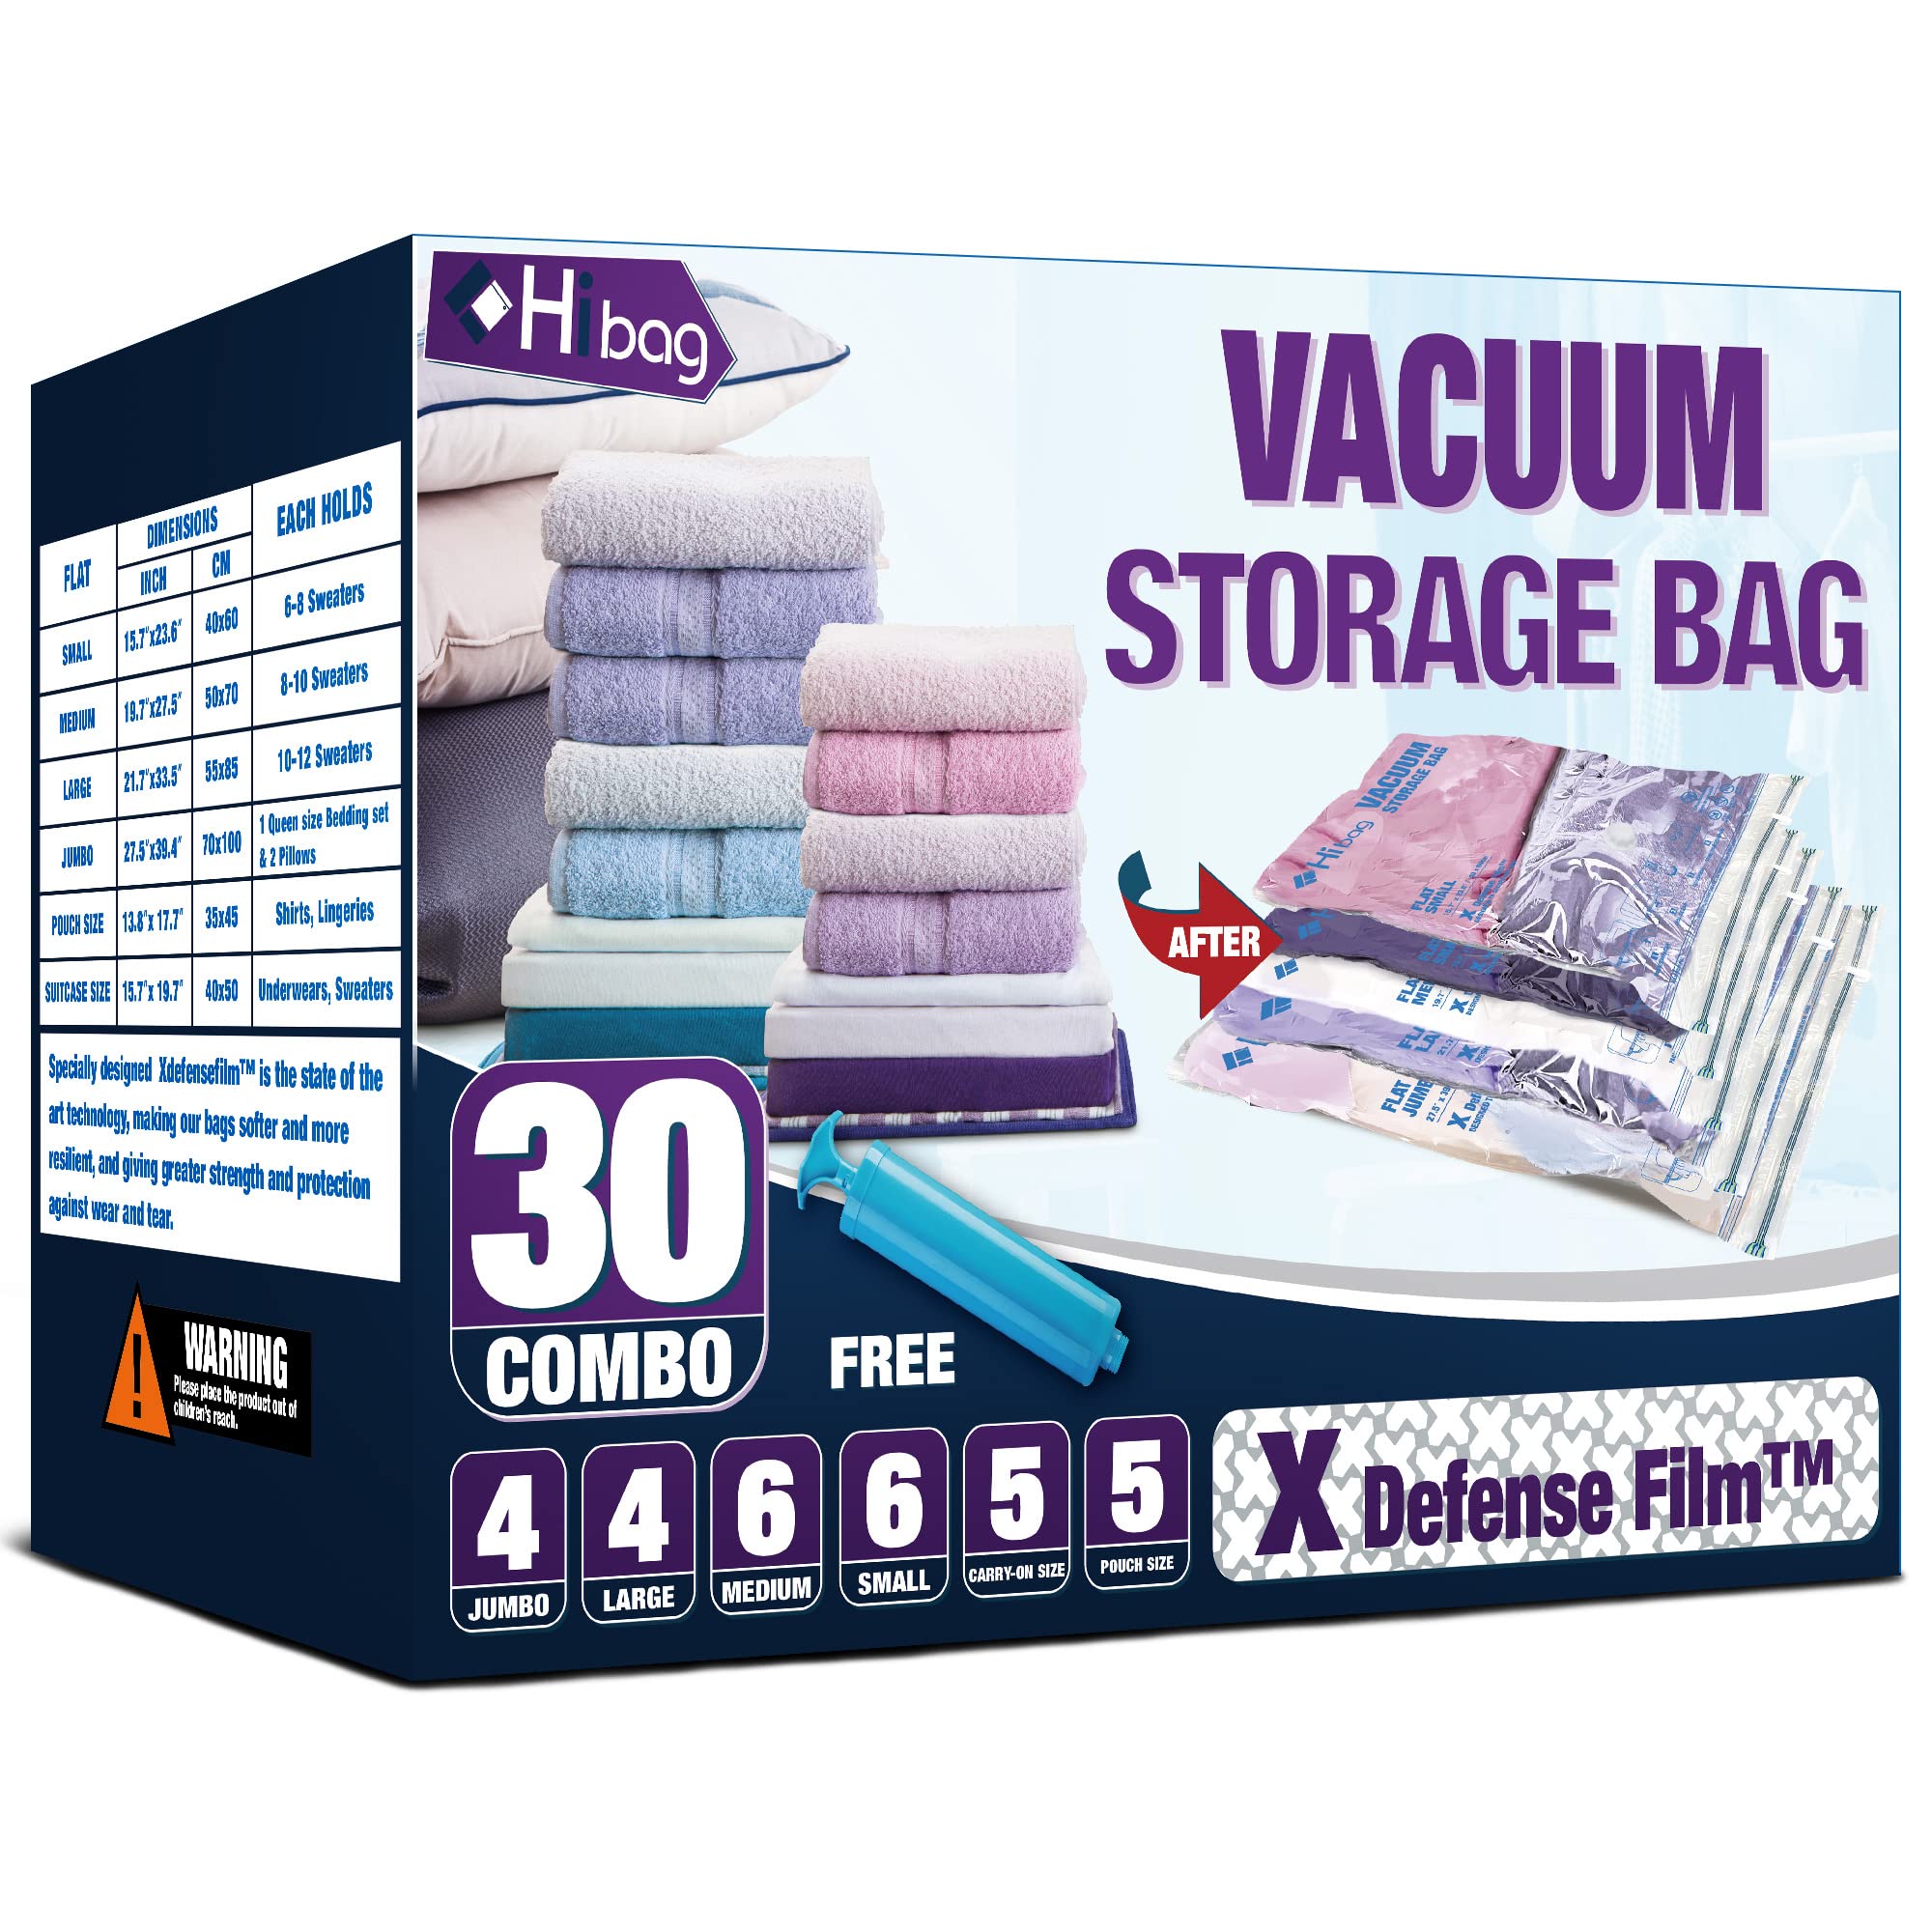 Amazon.com: CLEVHOM Vacuum Storage Bags Combo 12 Pack, Vatiety Space Saver  Bags for Clothes Beddings Comforters Blankets Quilts Duvets Coat Jacket  Sweater, Vacuum Sealer Bags Save 80% Space for Closet Organizers and